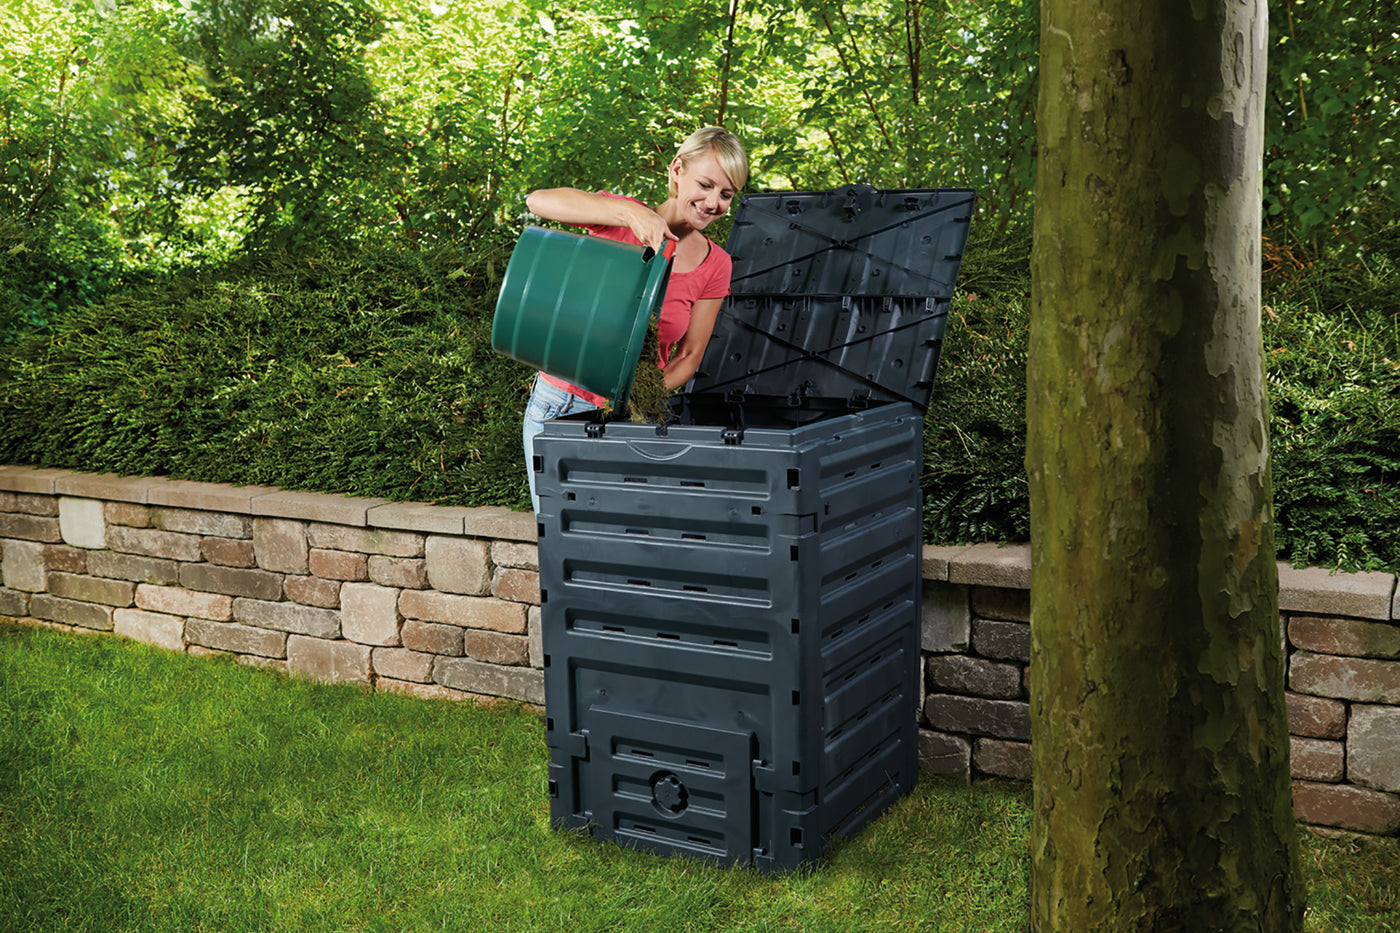 ECO-master 450 liters/120 gal black Composter - Made in Germany